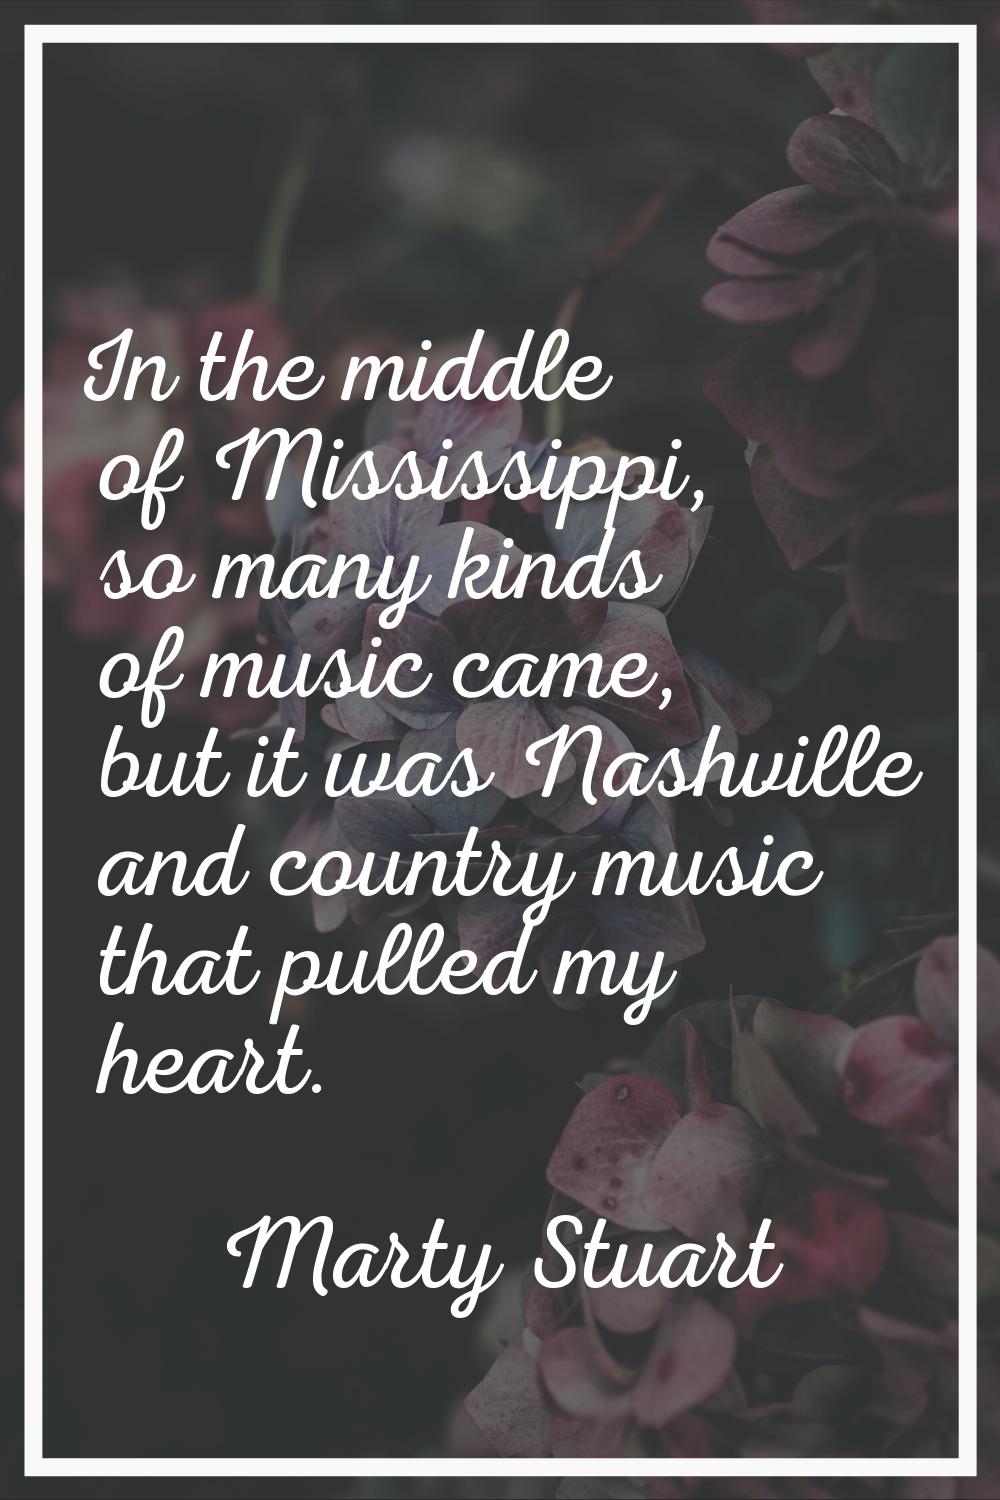 In the middle of Mississippi, so many kinds of music came, but it was Nashville and country music t